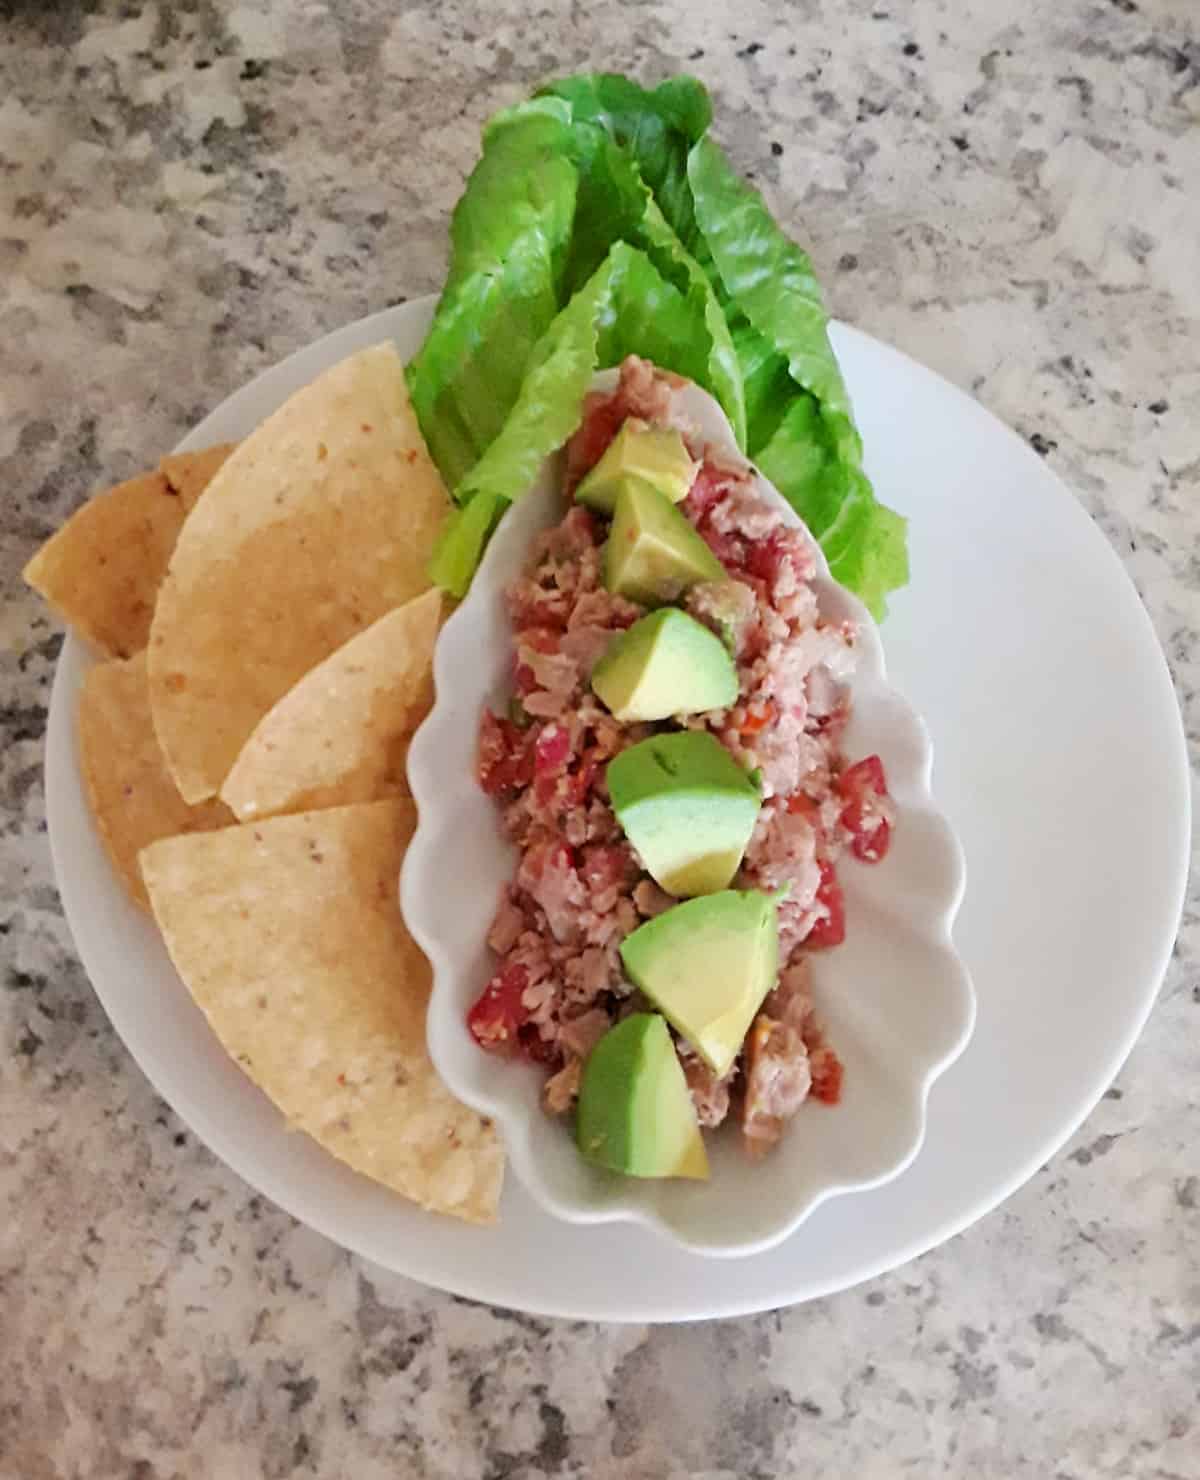 Tuna ceviche garnished with chopped avocado on white platter with lettuce and chips.